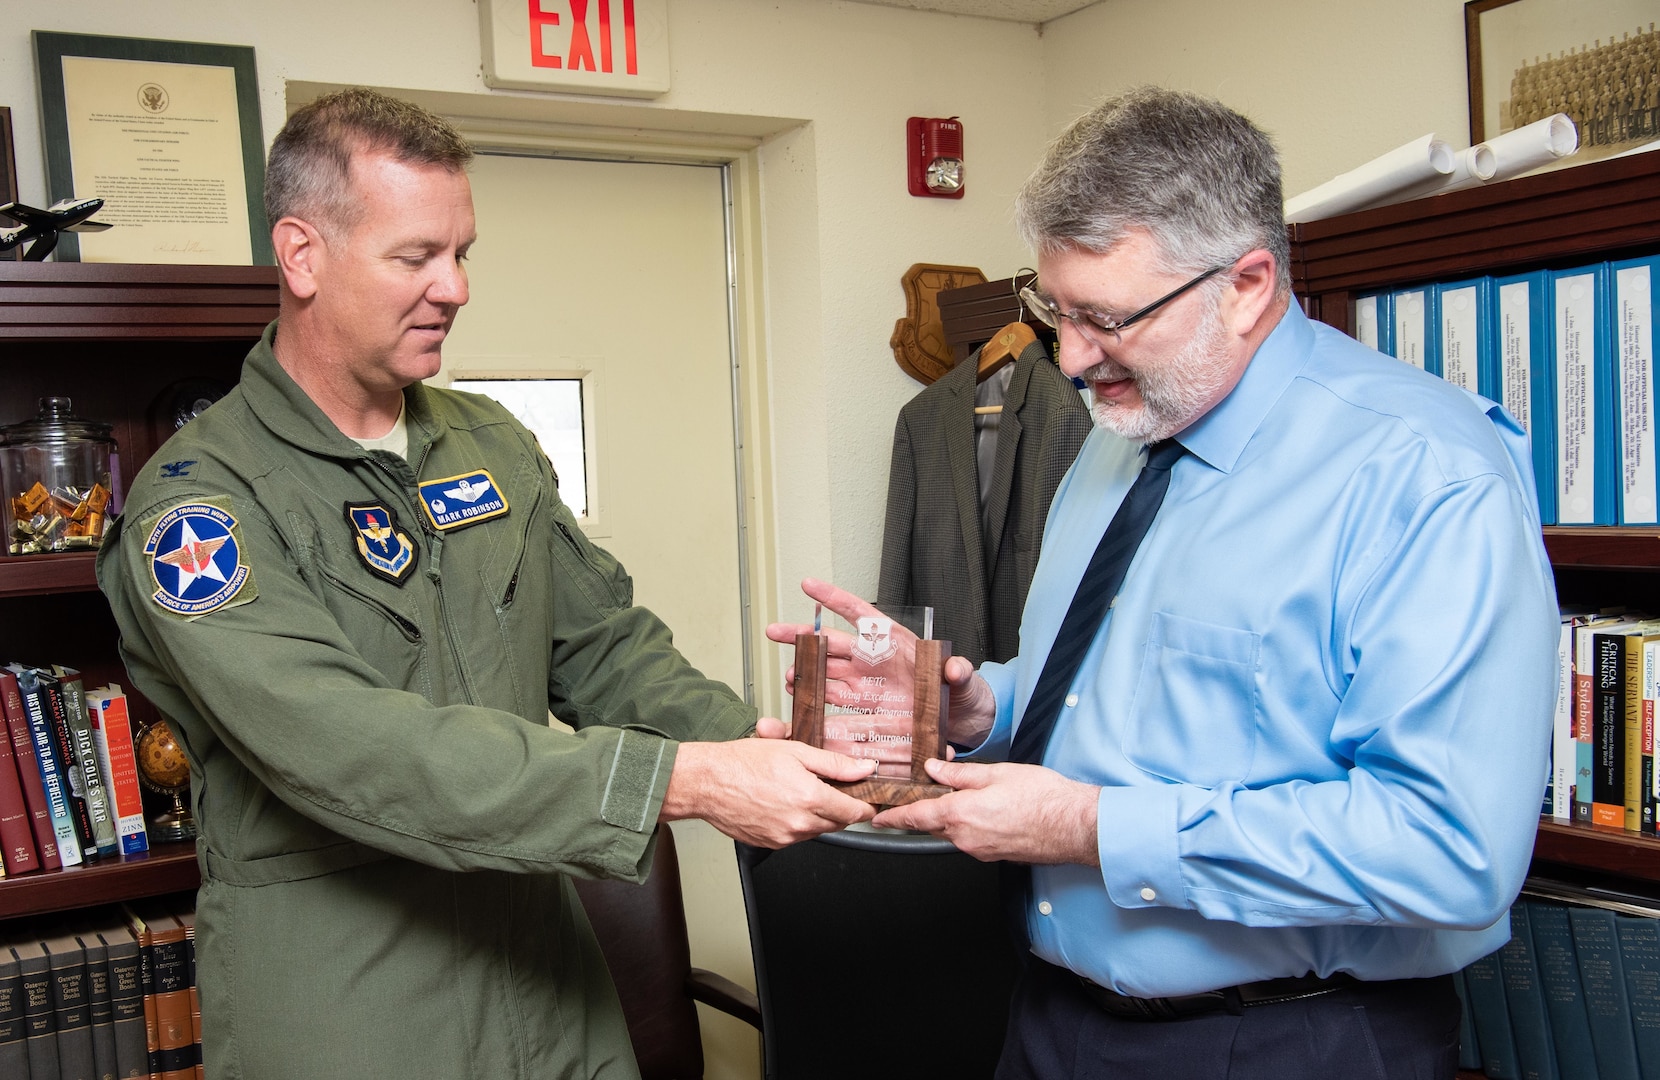 Col. Mark Robinson (left), 12th Flying Training Wing commander, presented Lane Bourgeois (right), 12th FTW historian, with the 2019 Wing Excellence in History Programs award from Air Education and Training Command at Joint Base San Antonio-Randolph June 12. Lane was recognized for his critical thinking presentations and for being the first wing to produce a historical study in the new format.